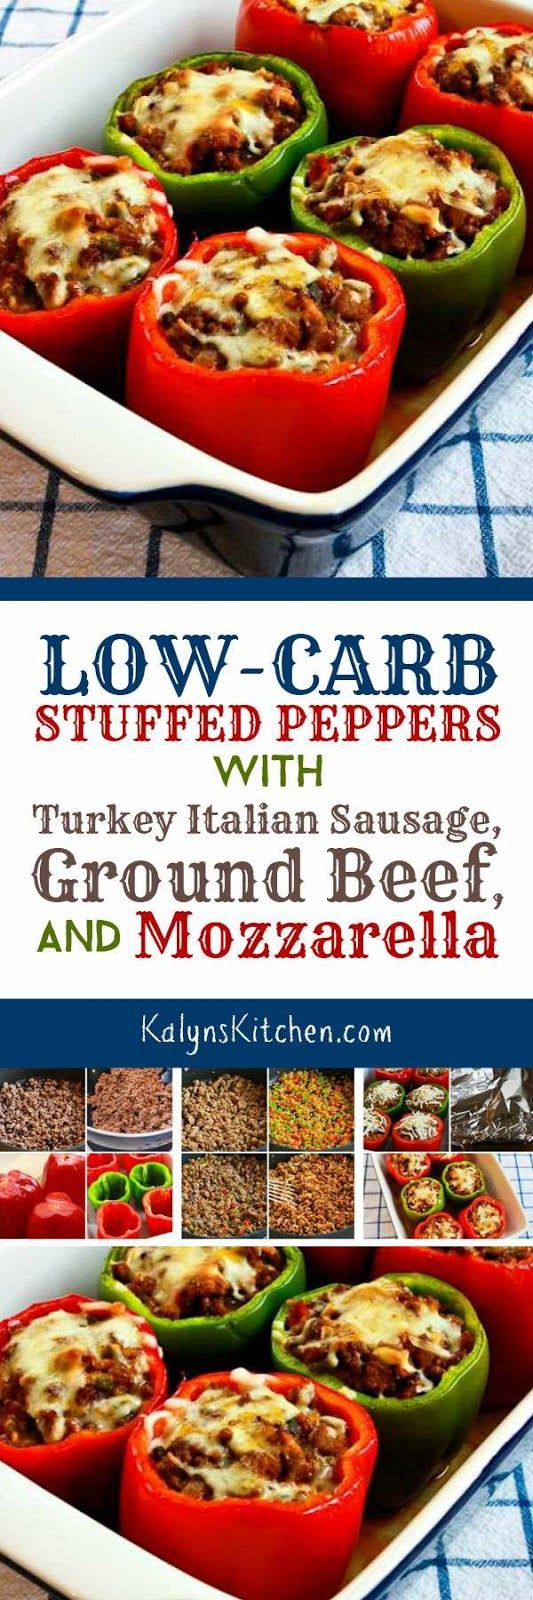 Turkey Sausage Recipes Low Carb
 17 Best images about KalynsKitchen All My Favorite Recipes